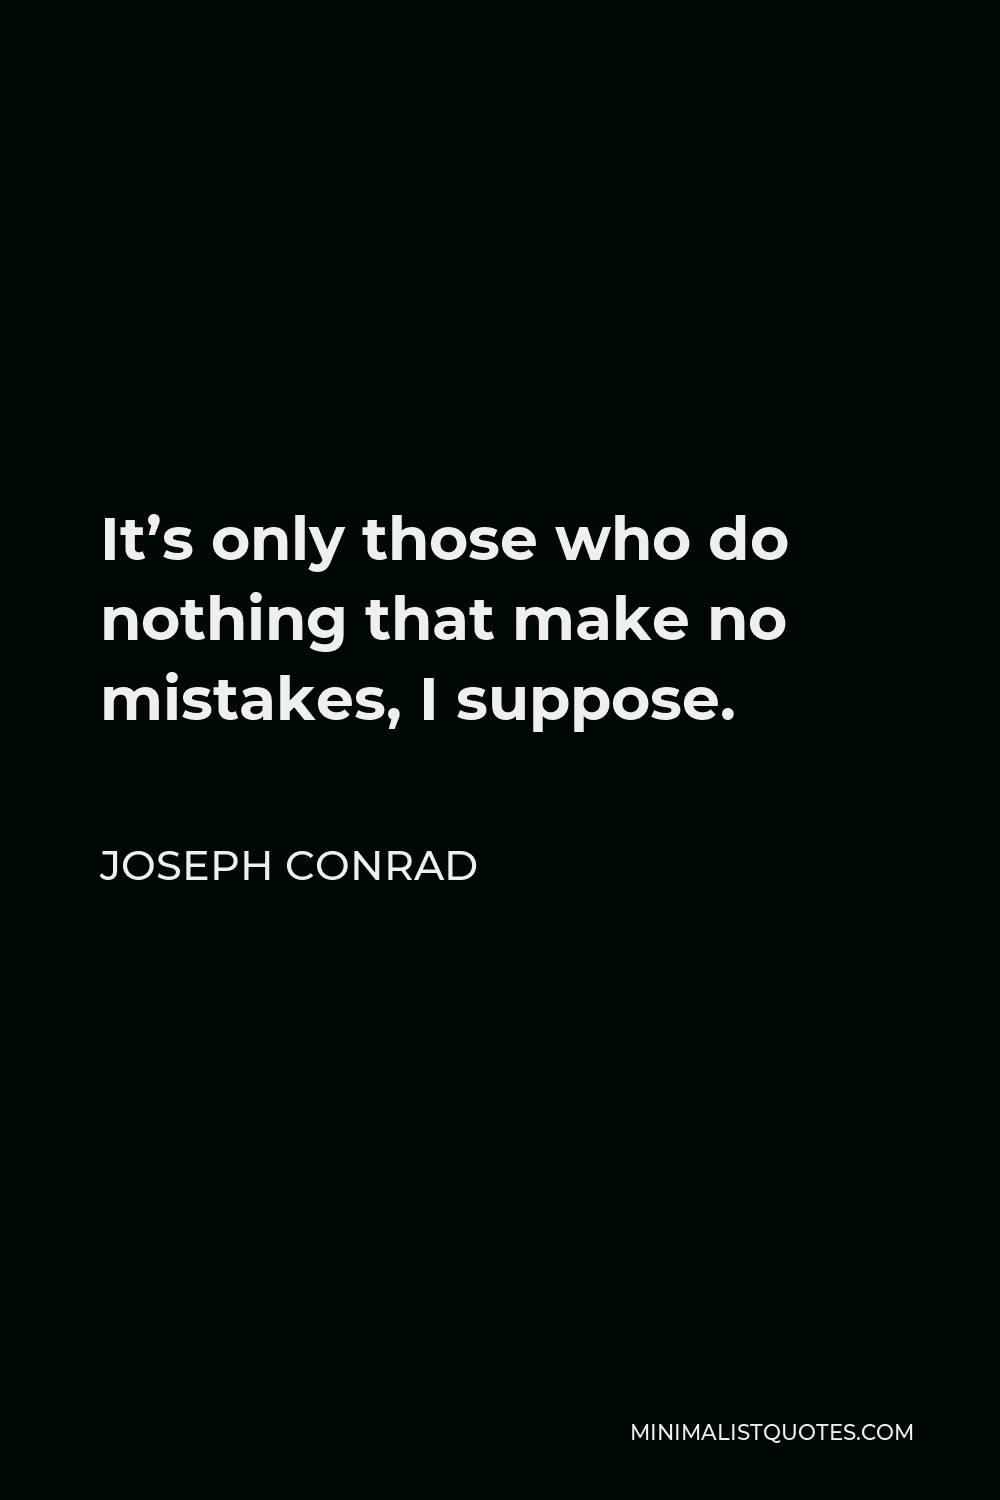 Joseph Conrad Quote: If you don't make mistakes, you don't make anything